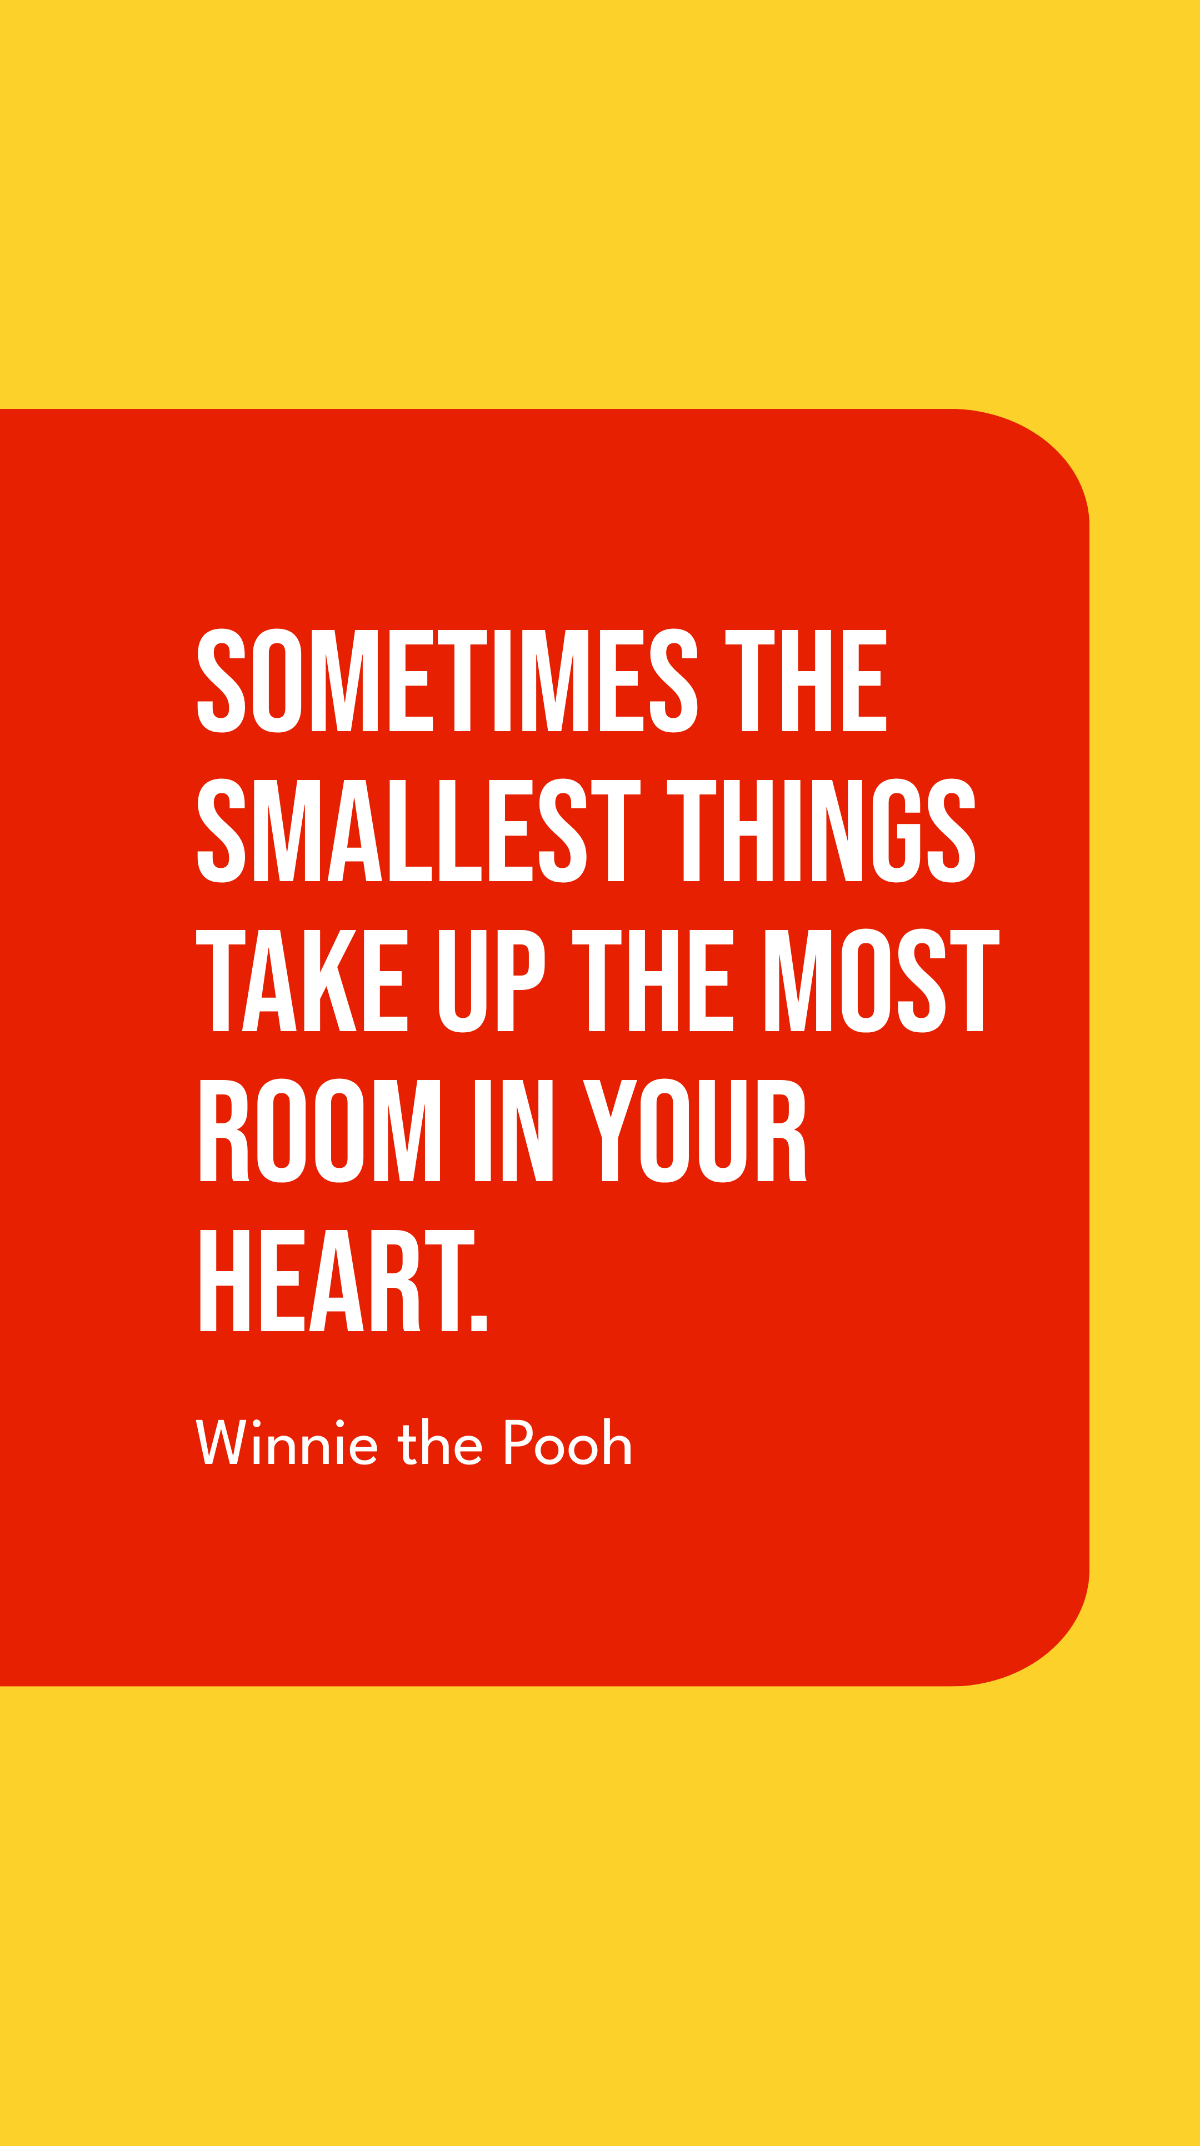 Winnie the Pooh - Sometimes the smallest things take up the most room in your heart. Template